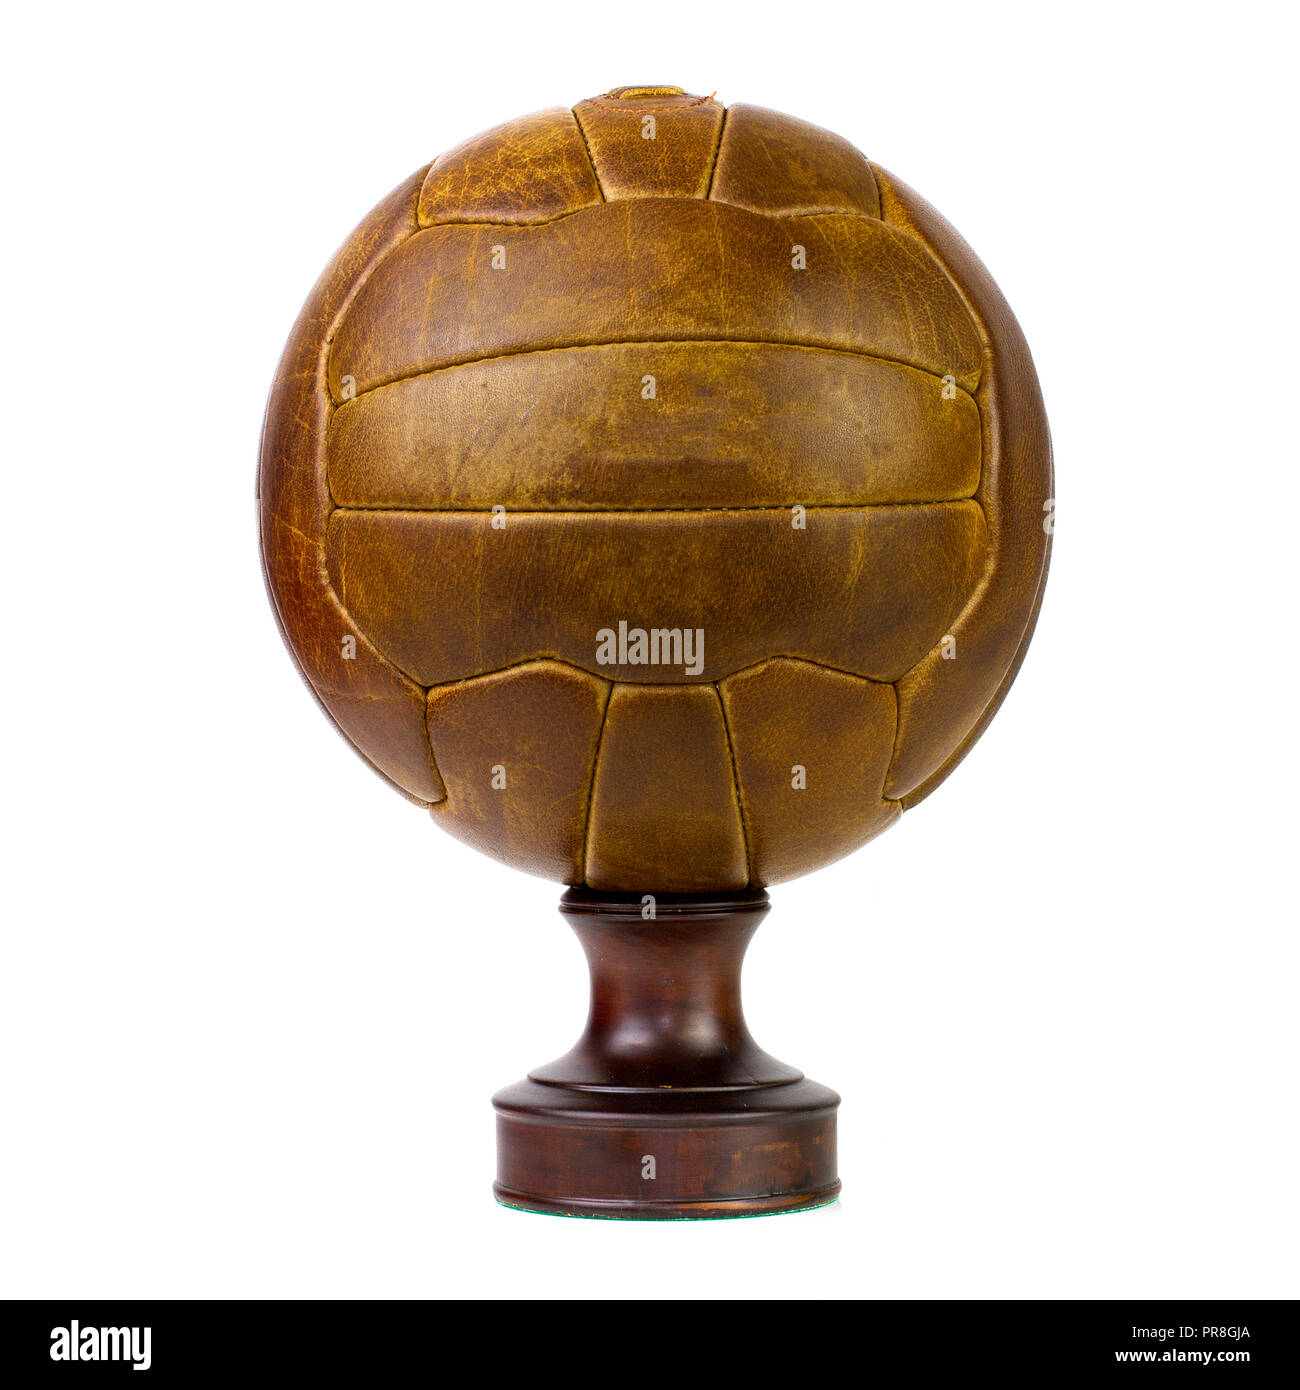 vintage lace up leather football soccer ball Stock Photo